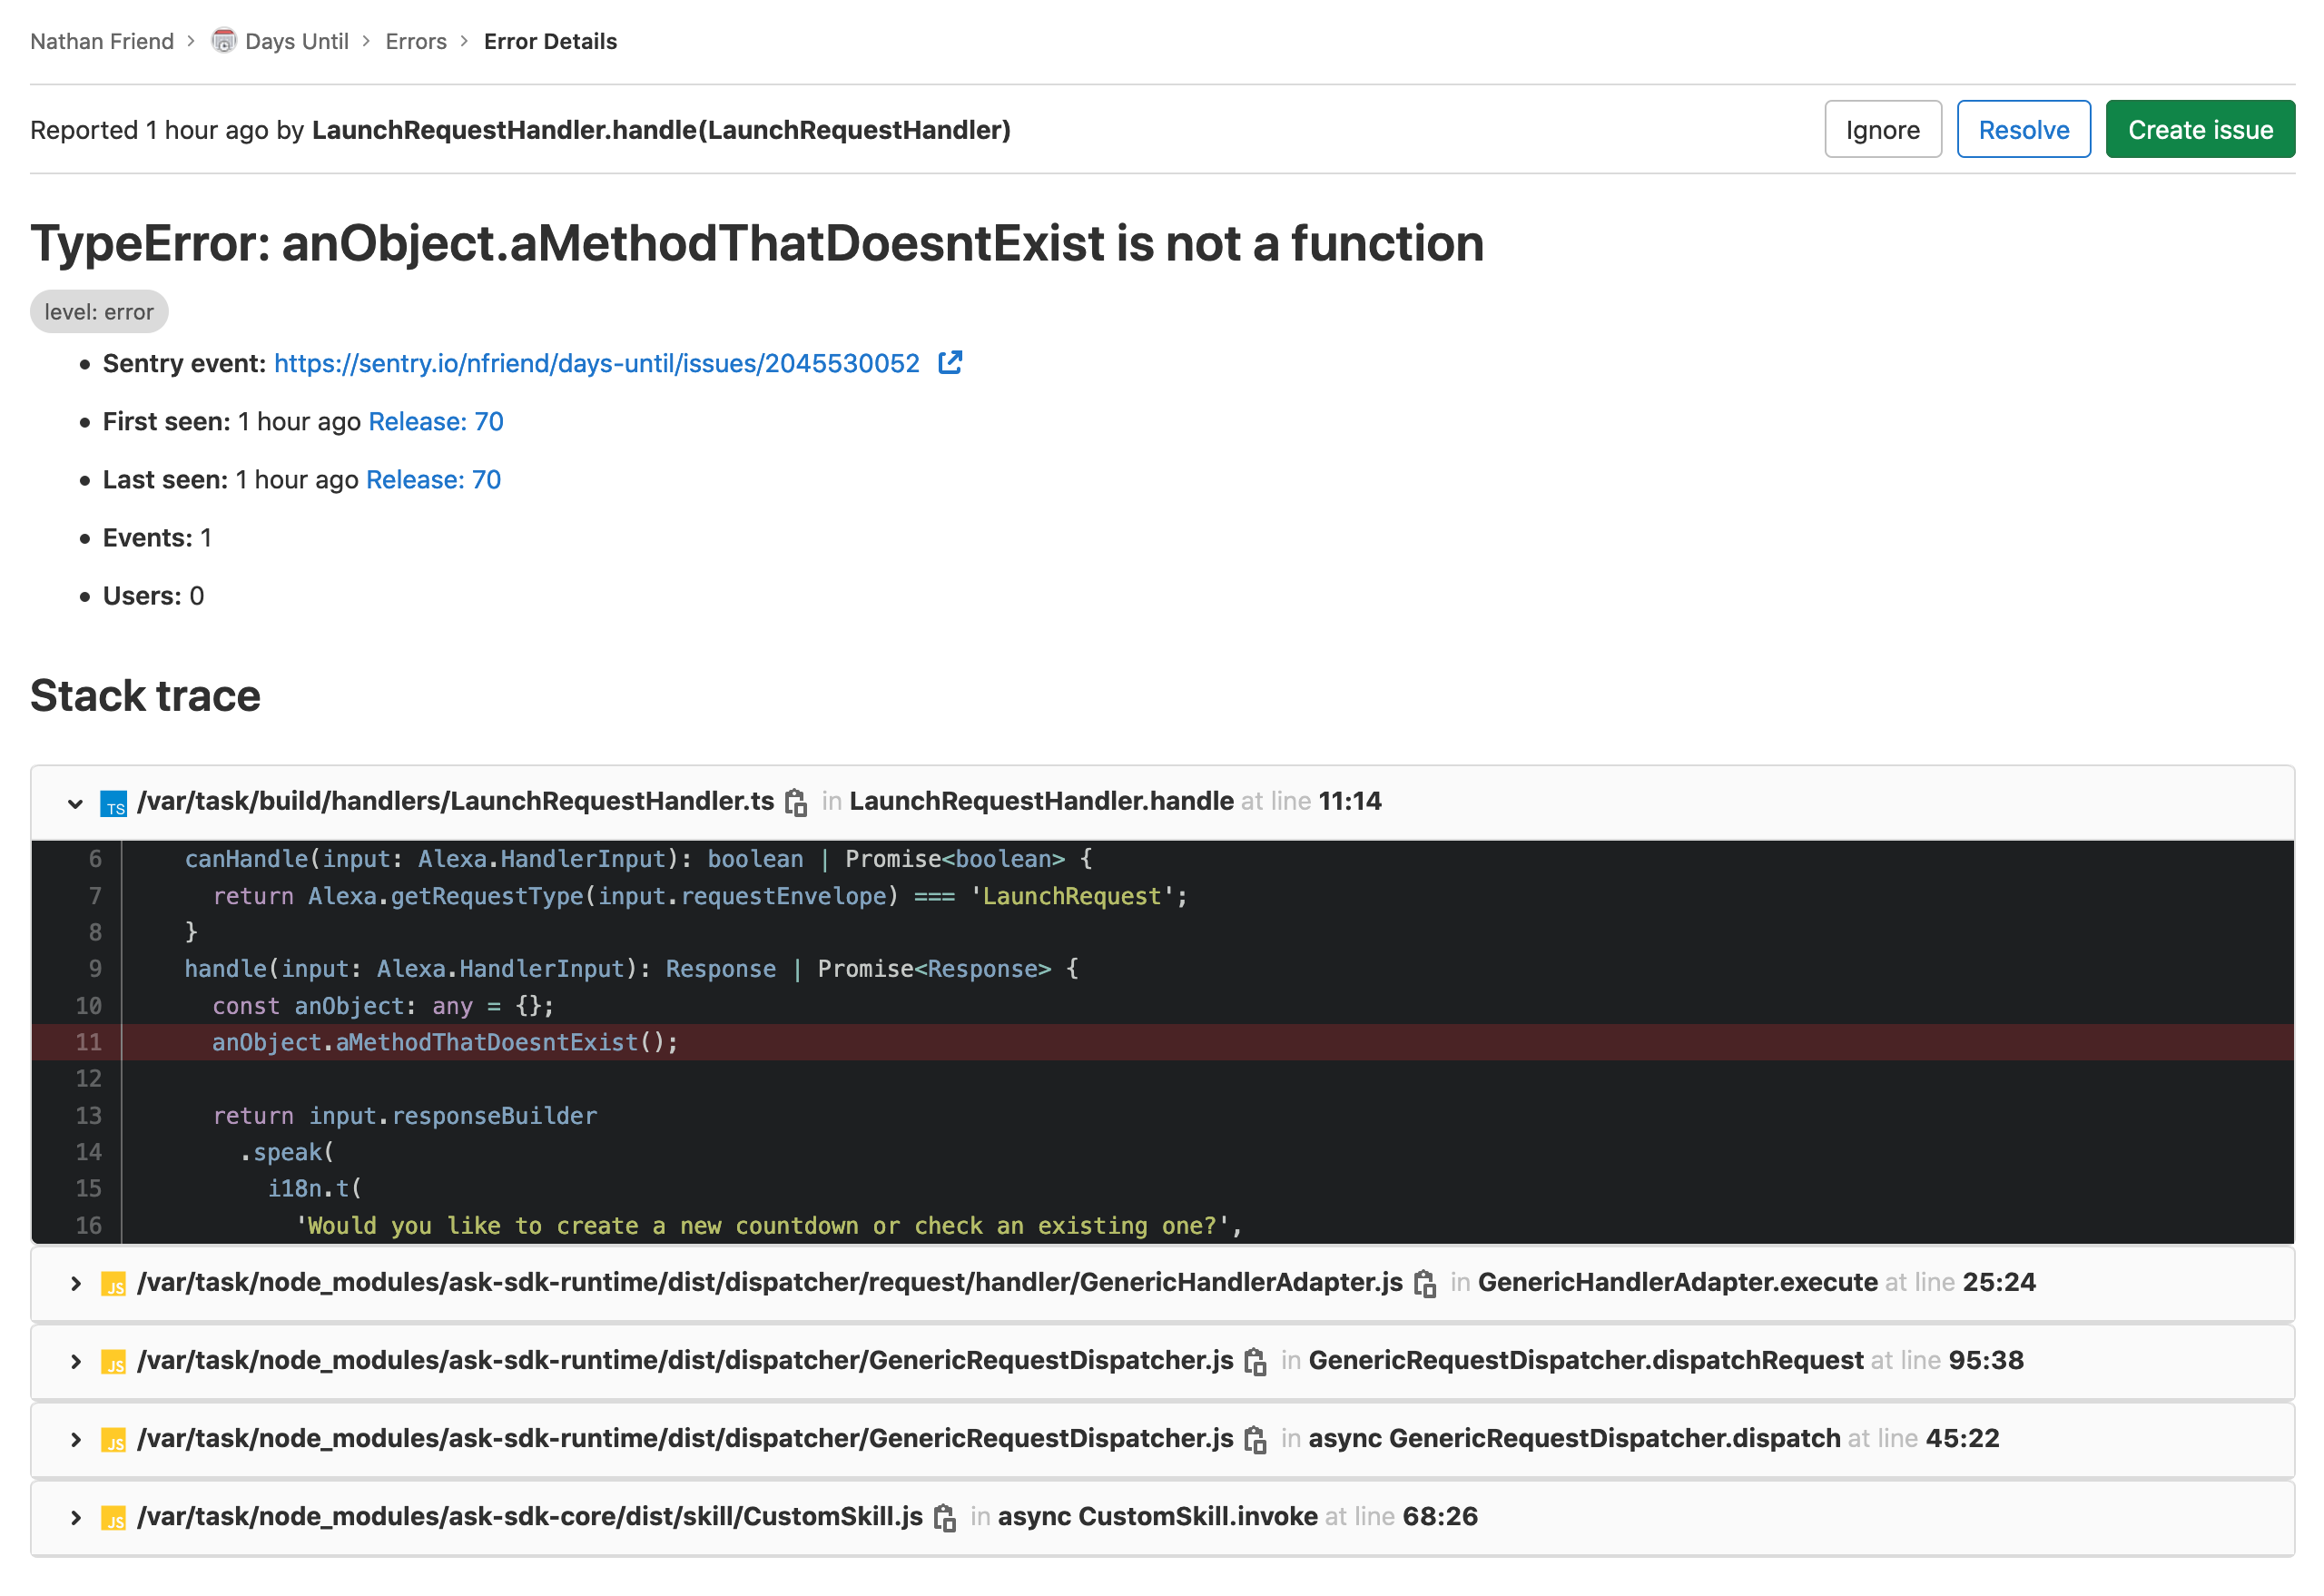 A screenshot of GitLab's Error Tracking page showing an issue's details